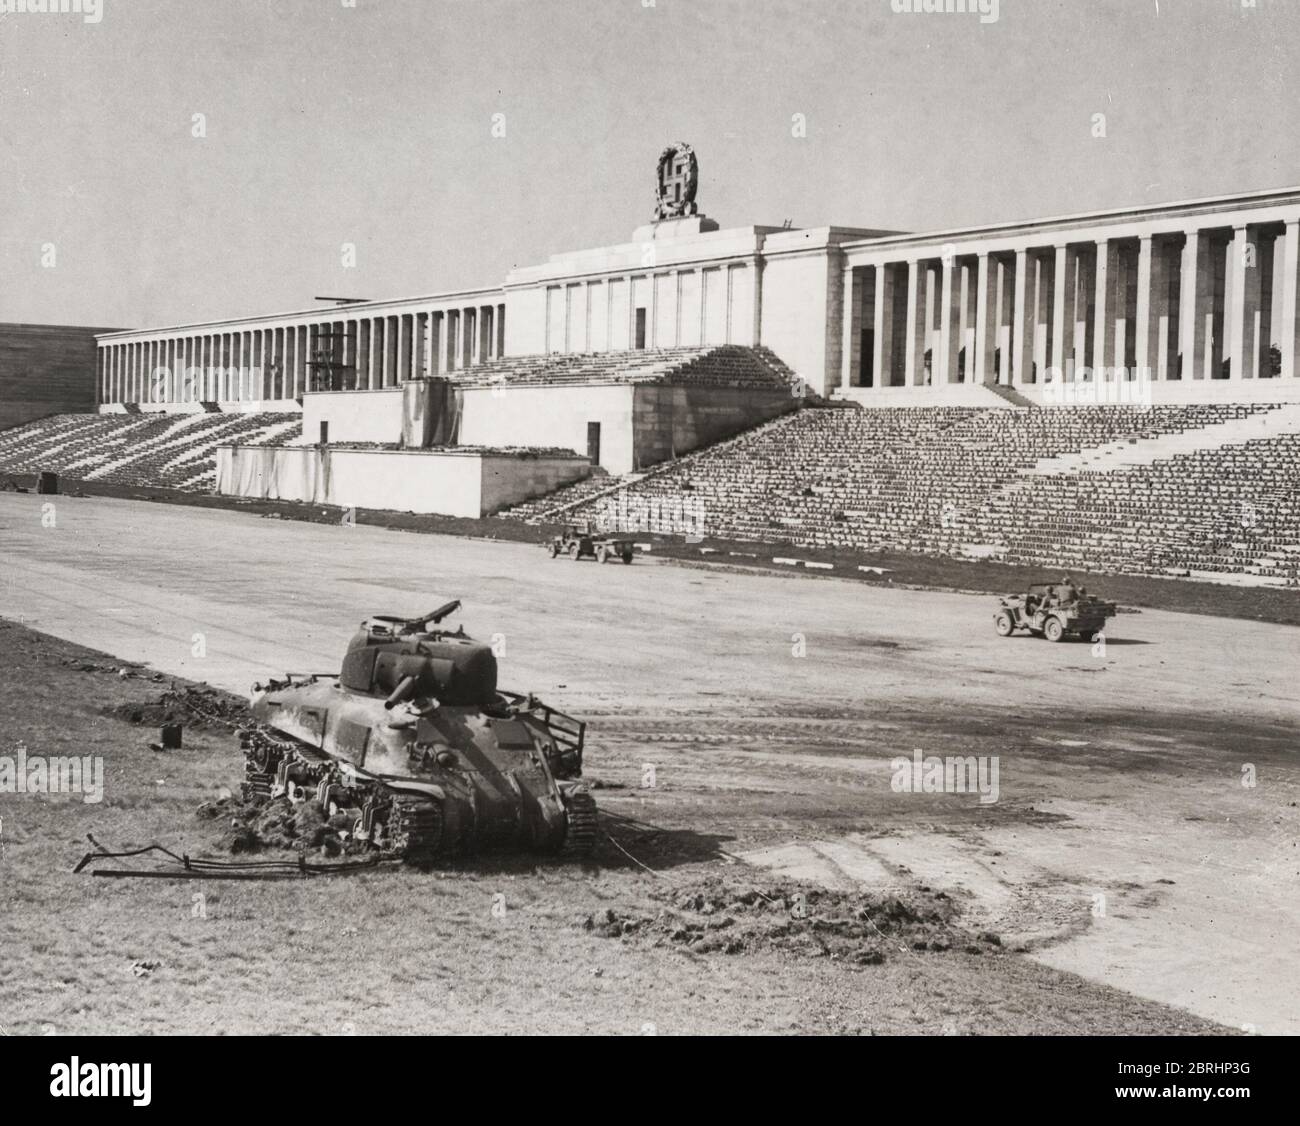 Vintage photograph World War II - Hitler Nazi Nuremberg rally ground, designed by Albert Speer, following liberation by the Allies. Stock Photo